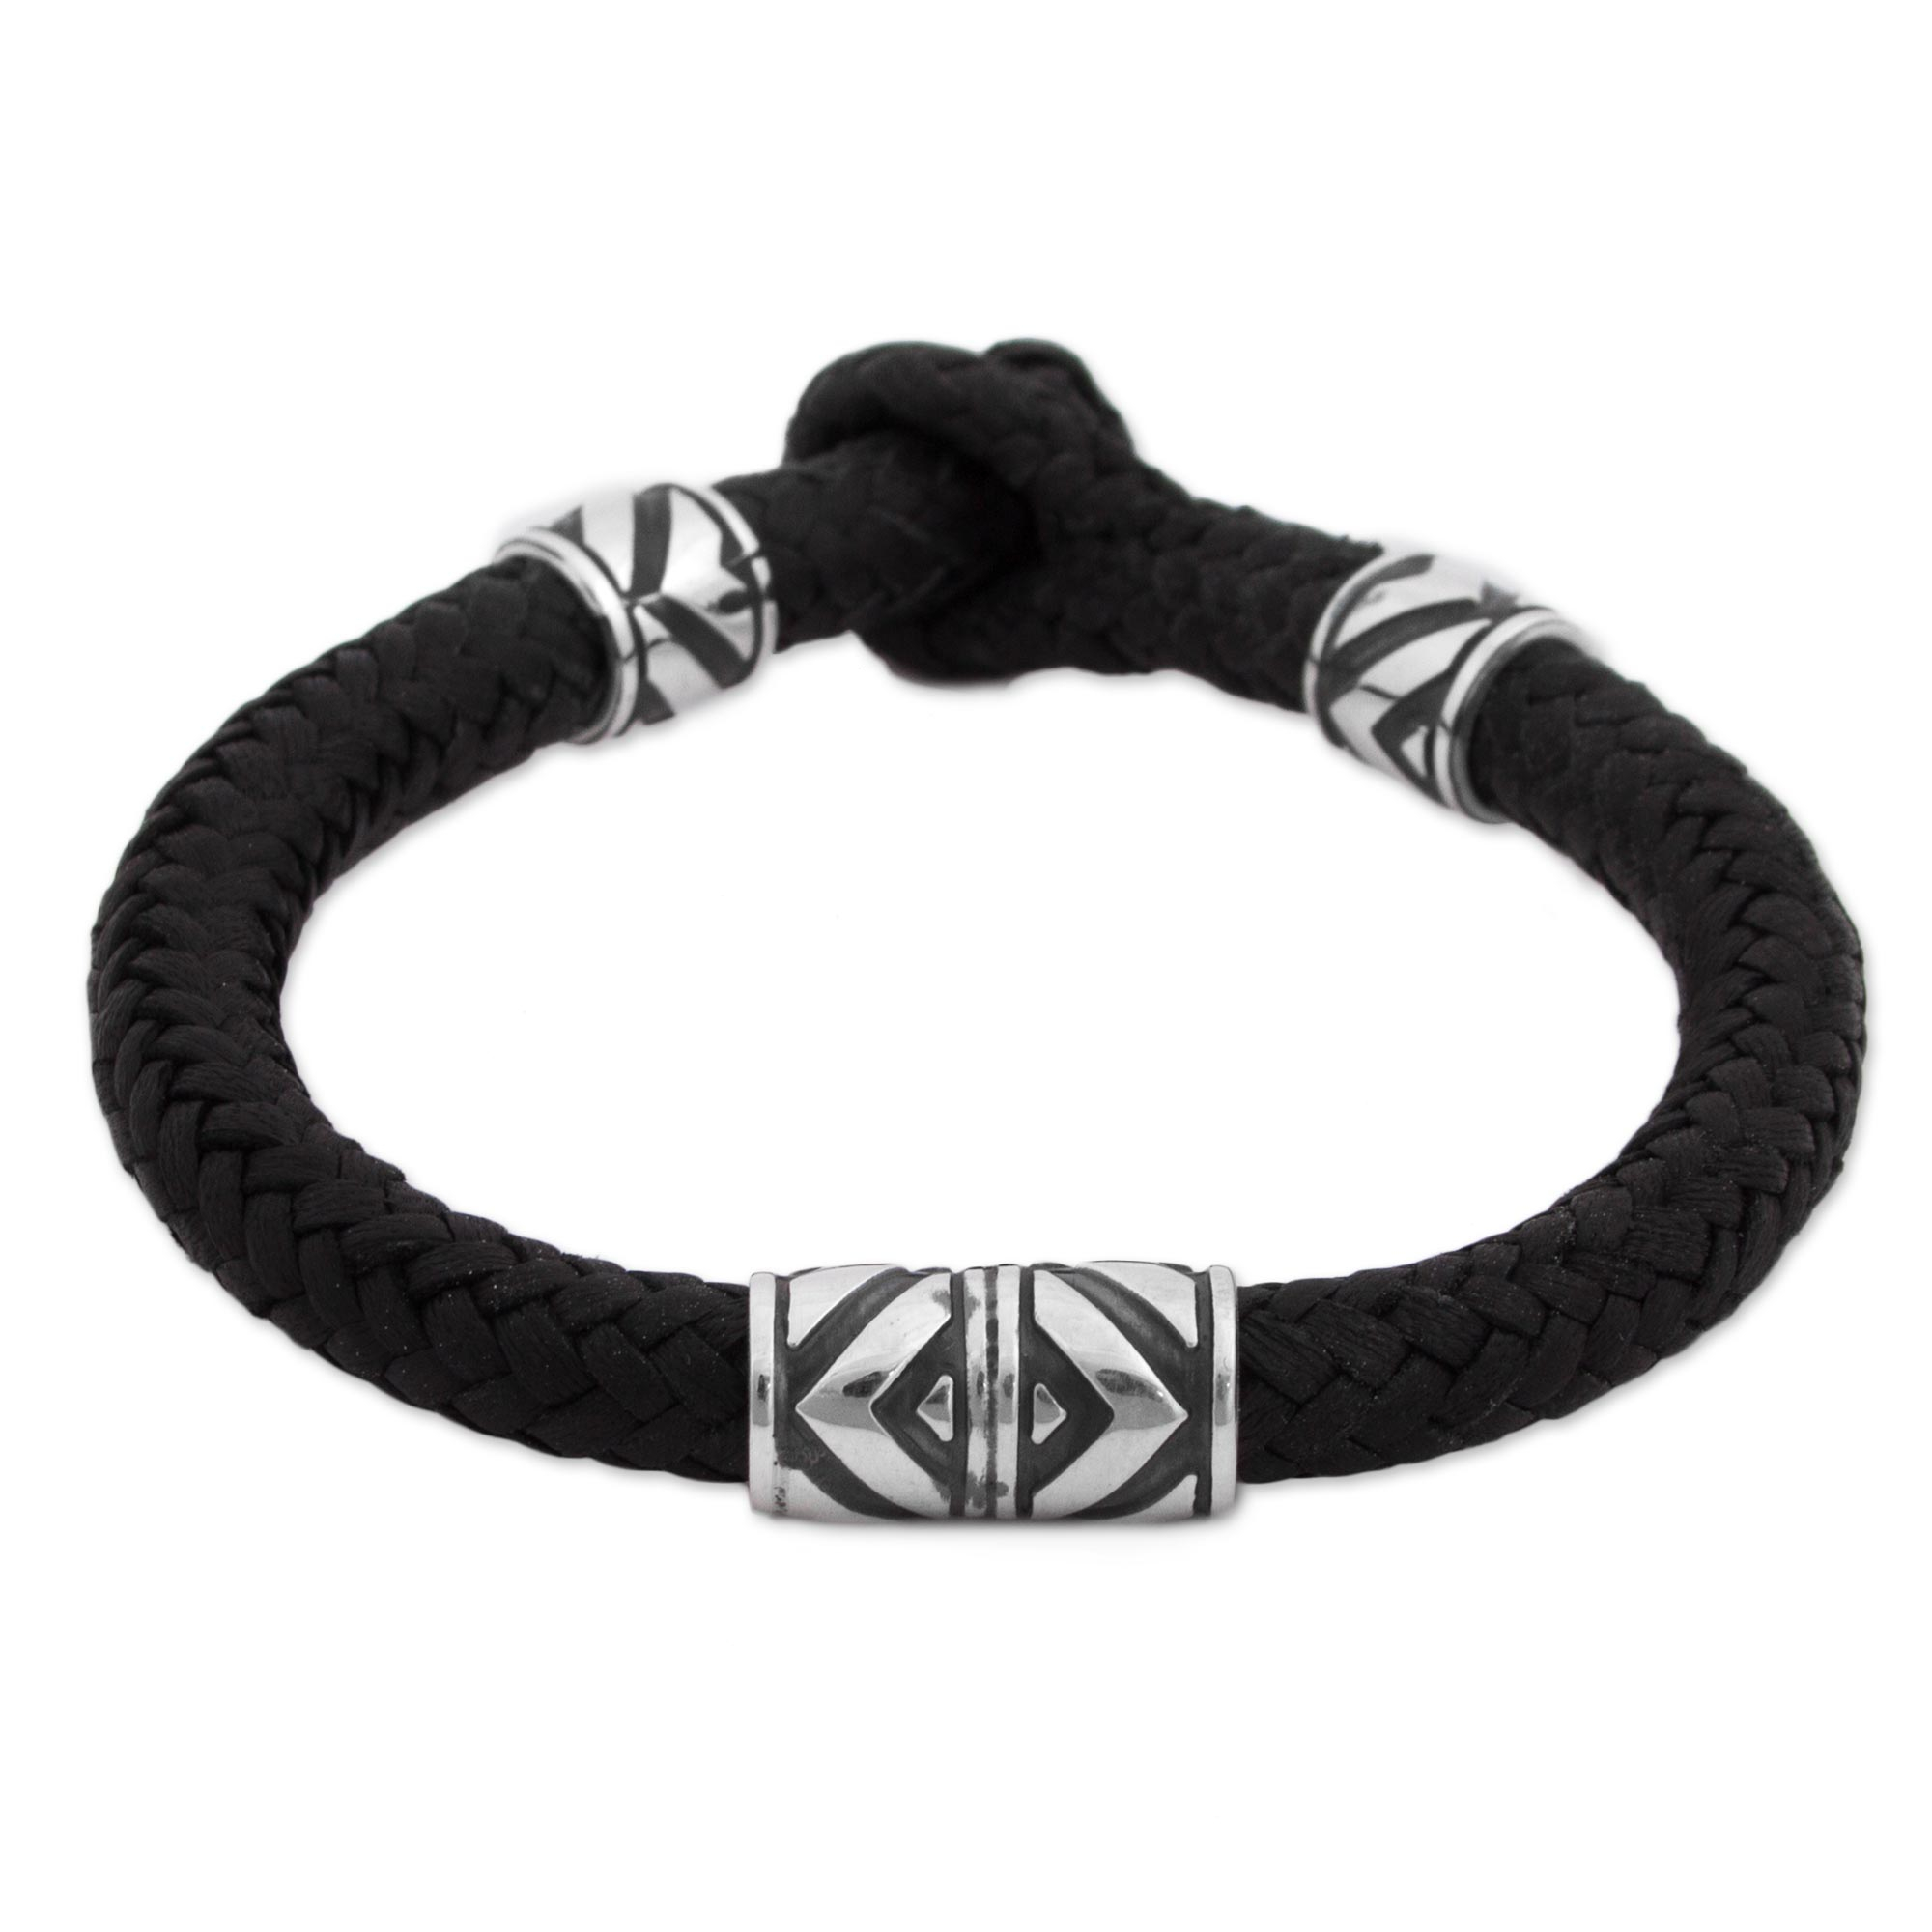 UNICEF Market  Sterling Silver and Leather Wristband Bracelet